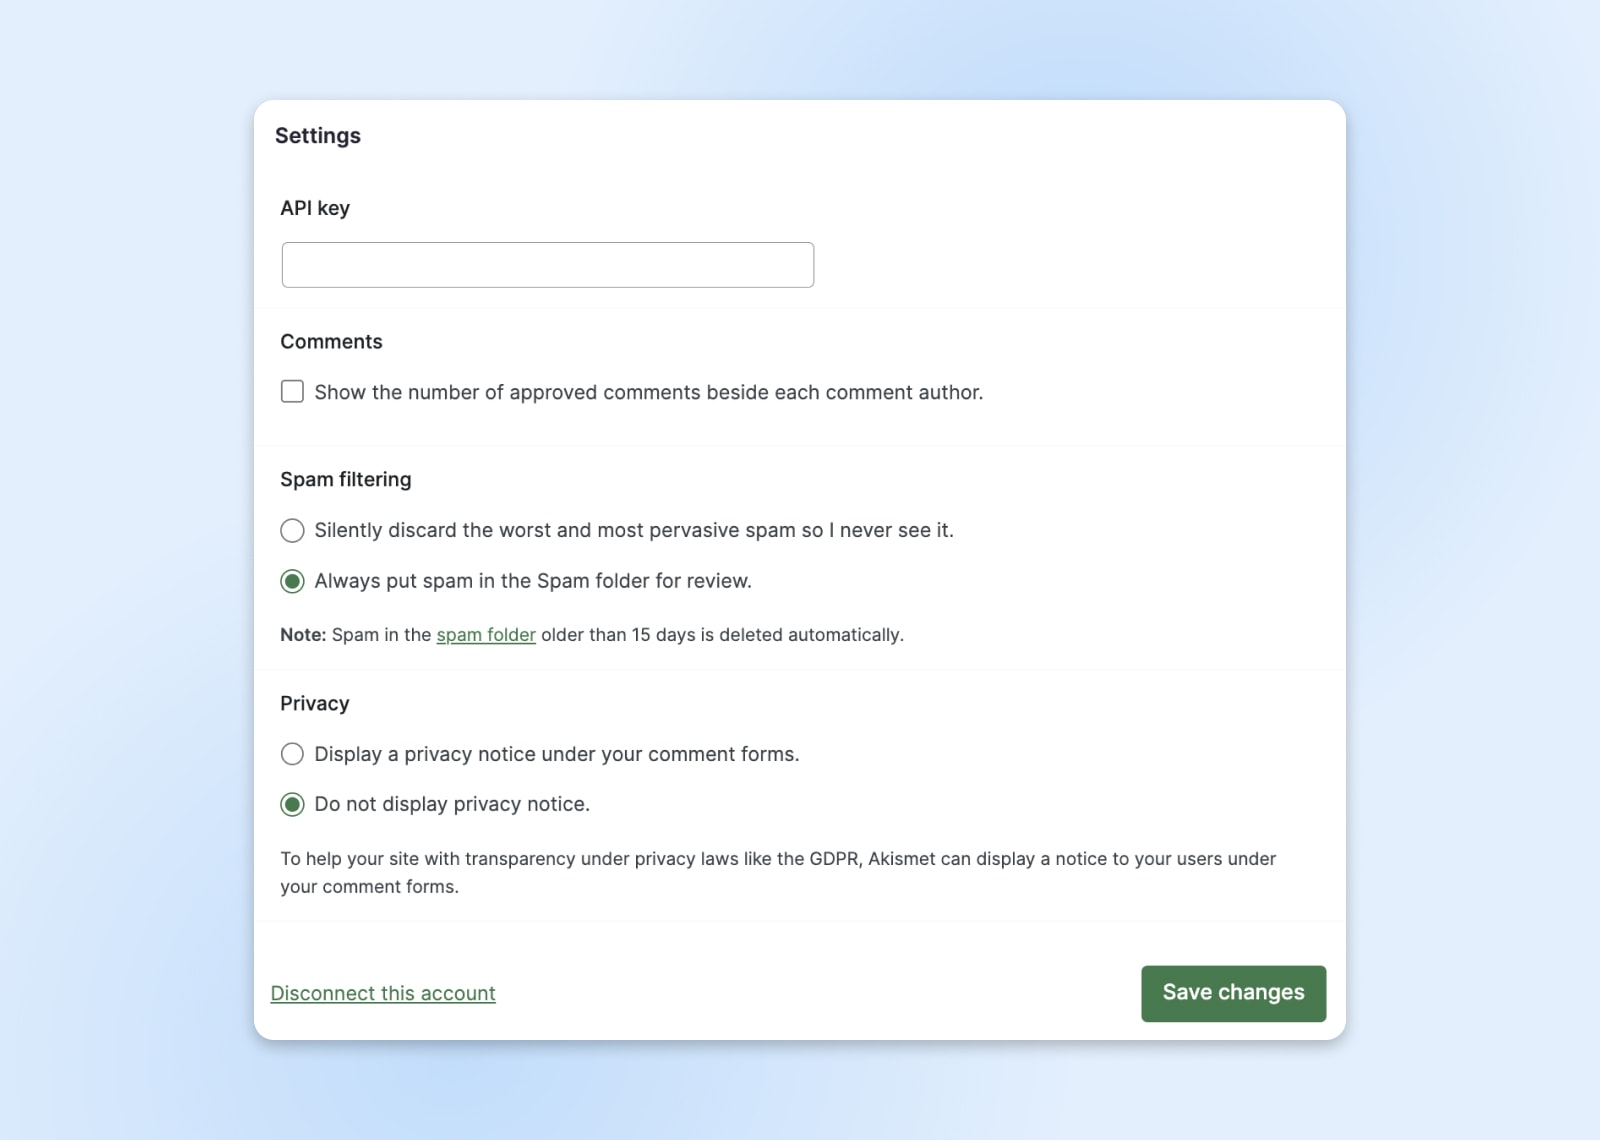 Akismet "Settings" dialog box with options for comments, spam filtering, and privacy.